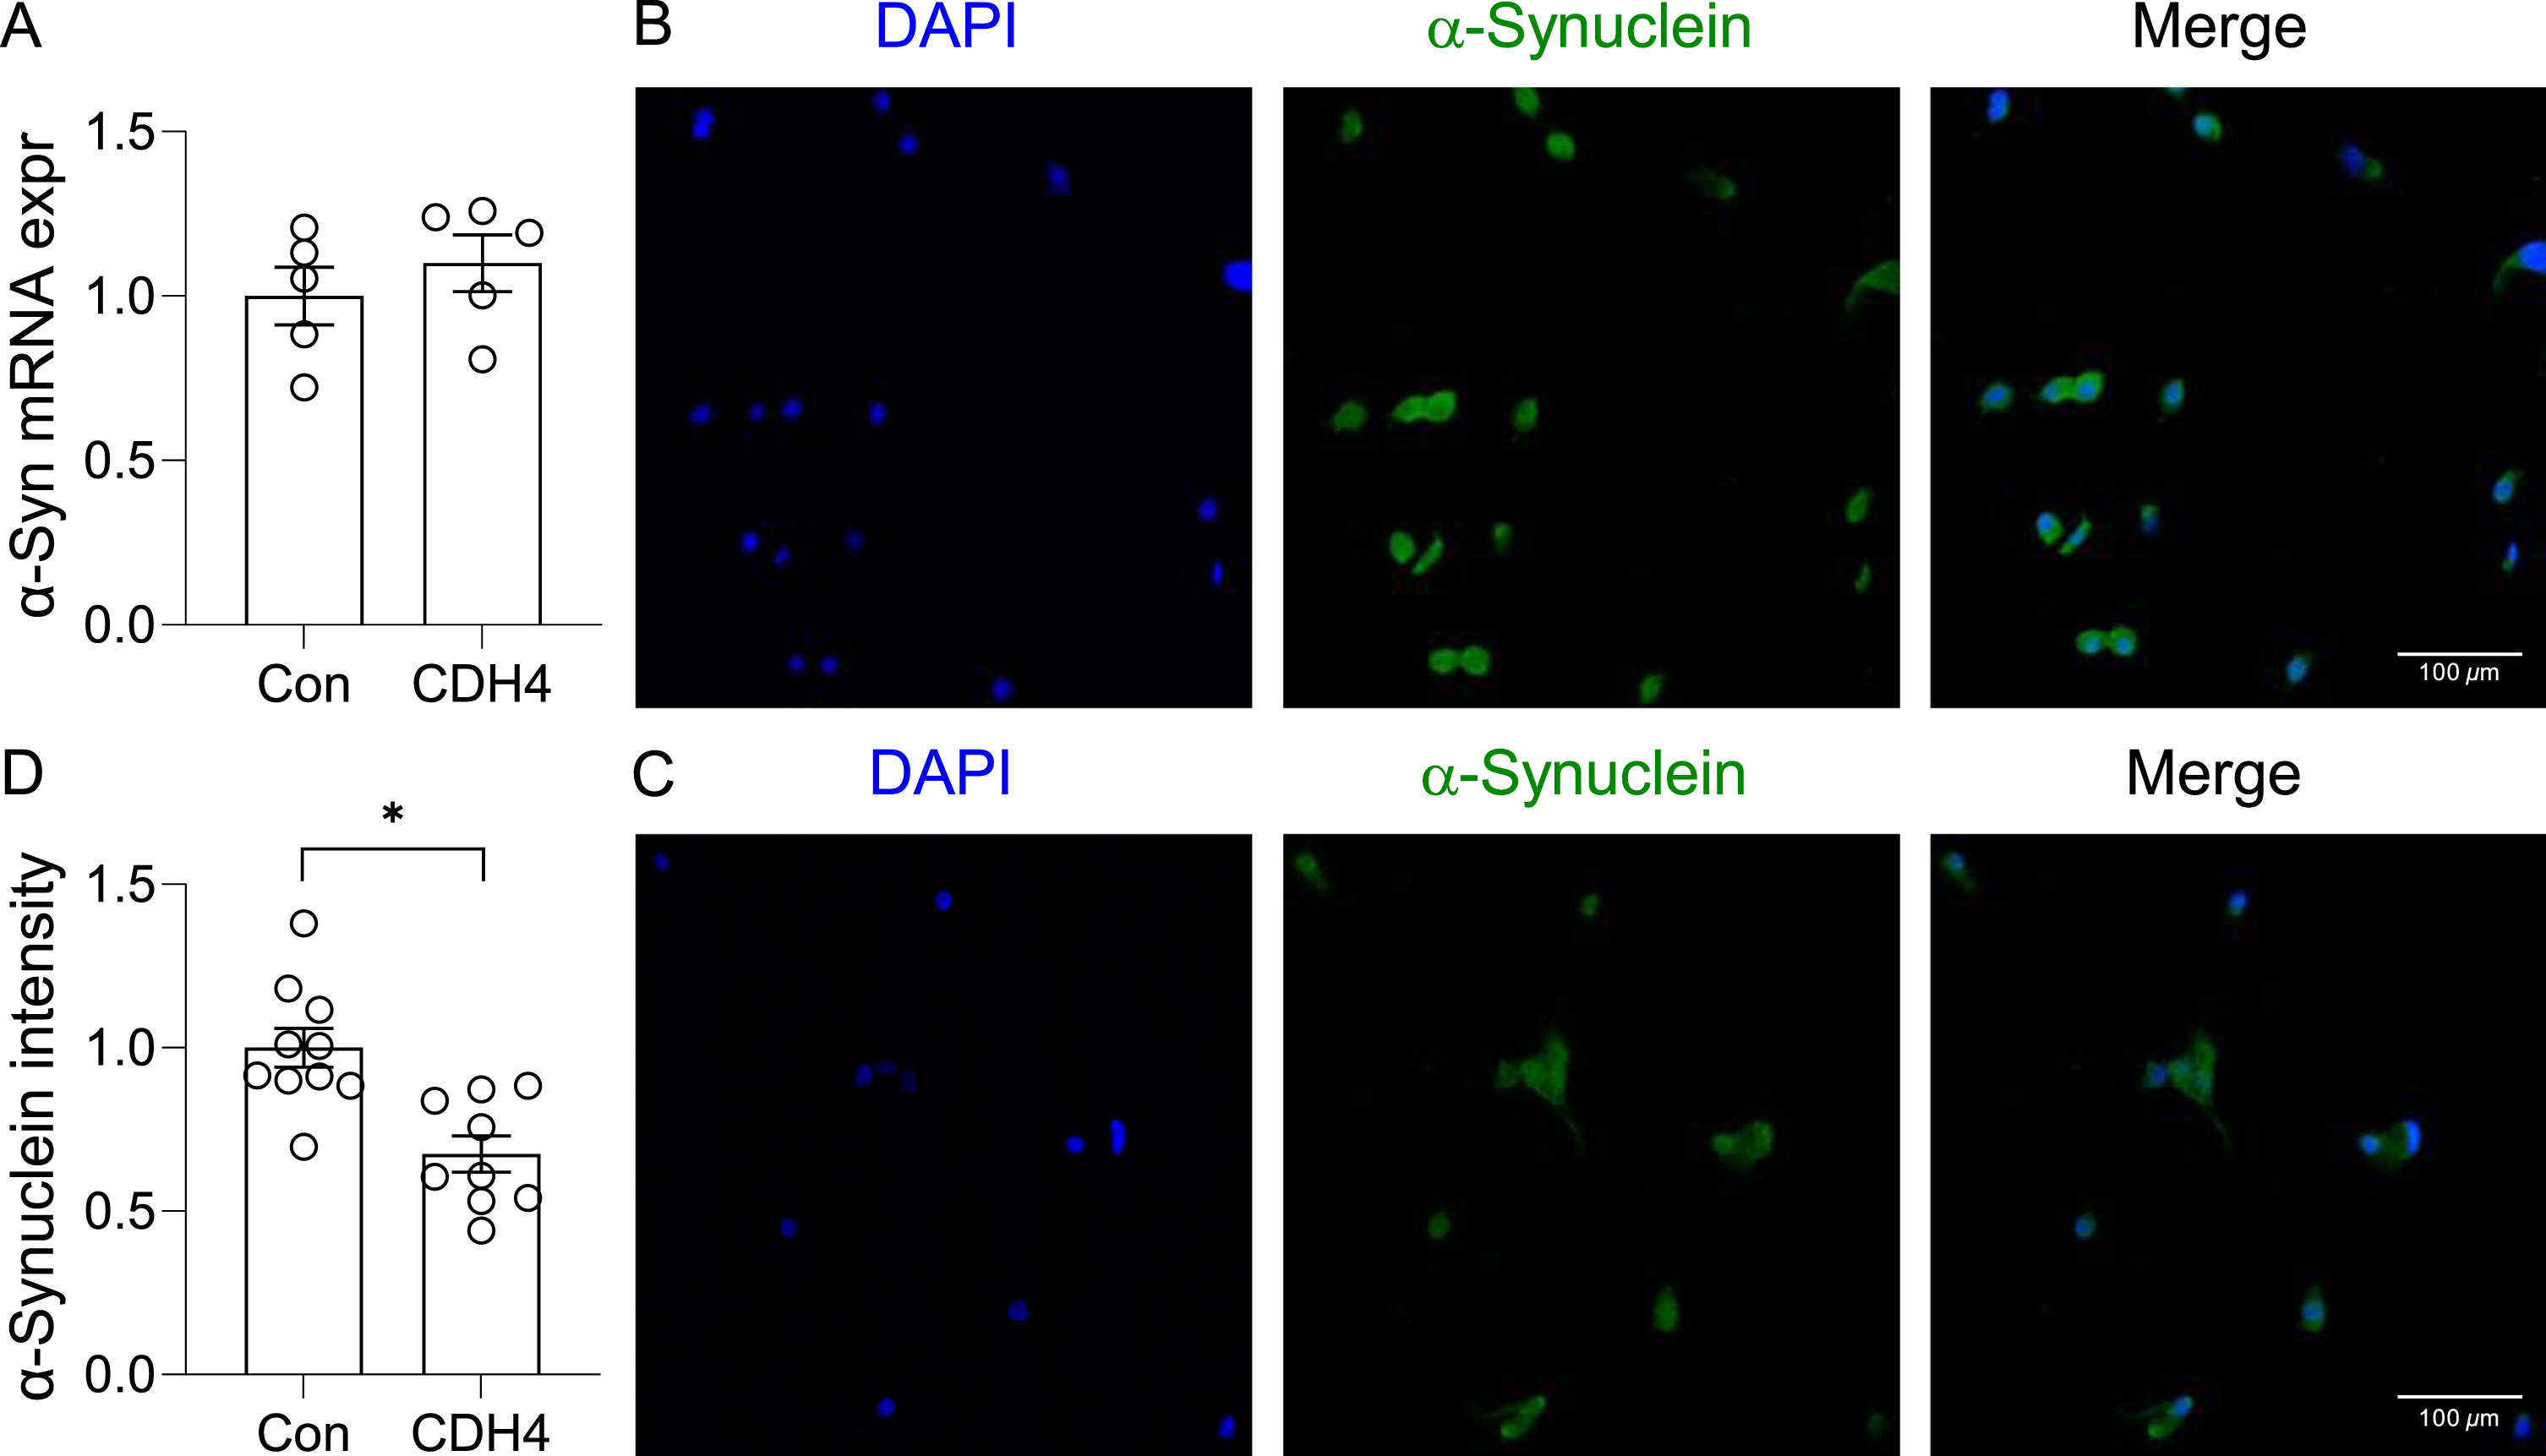 Effect of CDH4 on α-synuclein aggregation. A) The OLN-AS7 oligodendrocyte MSA cell model was transfected with CDH4 cDNA or empty-vector control (Con) and α-synuclein expression measured by qPCR. B) Control cells and (C) CDH4-transfected cells were immunofluorescent-stained and examined under a confocal microscope. D) A comparion of α-synuclein signal intensity of the two groups. Data represent mean and SE as error bars; *p < 0.05.